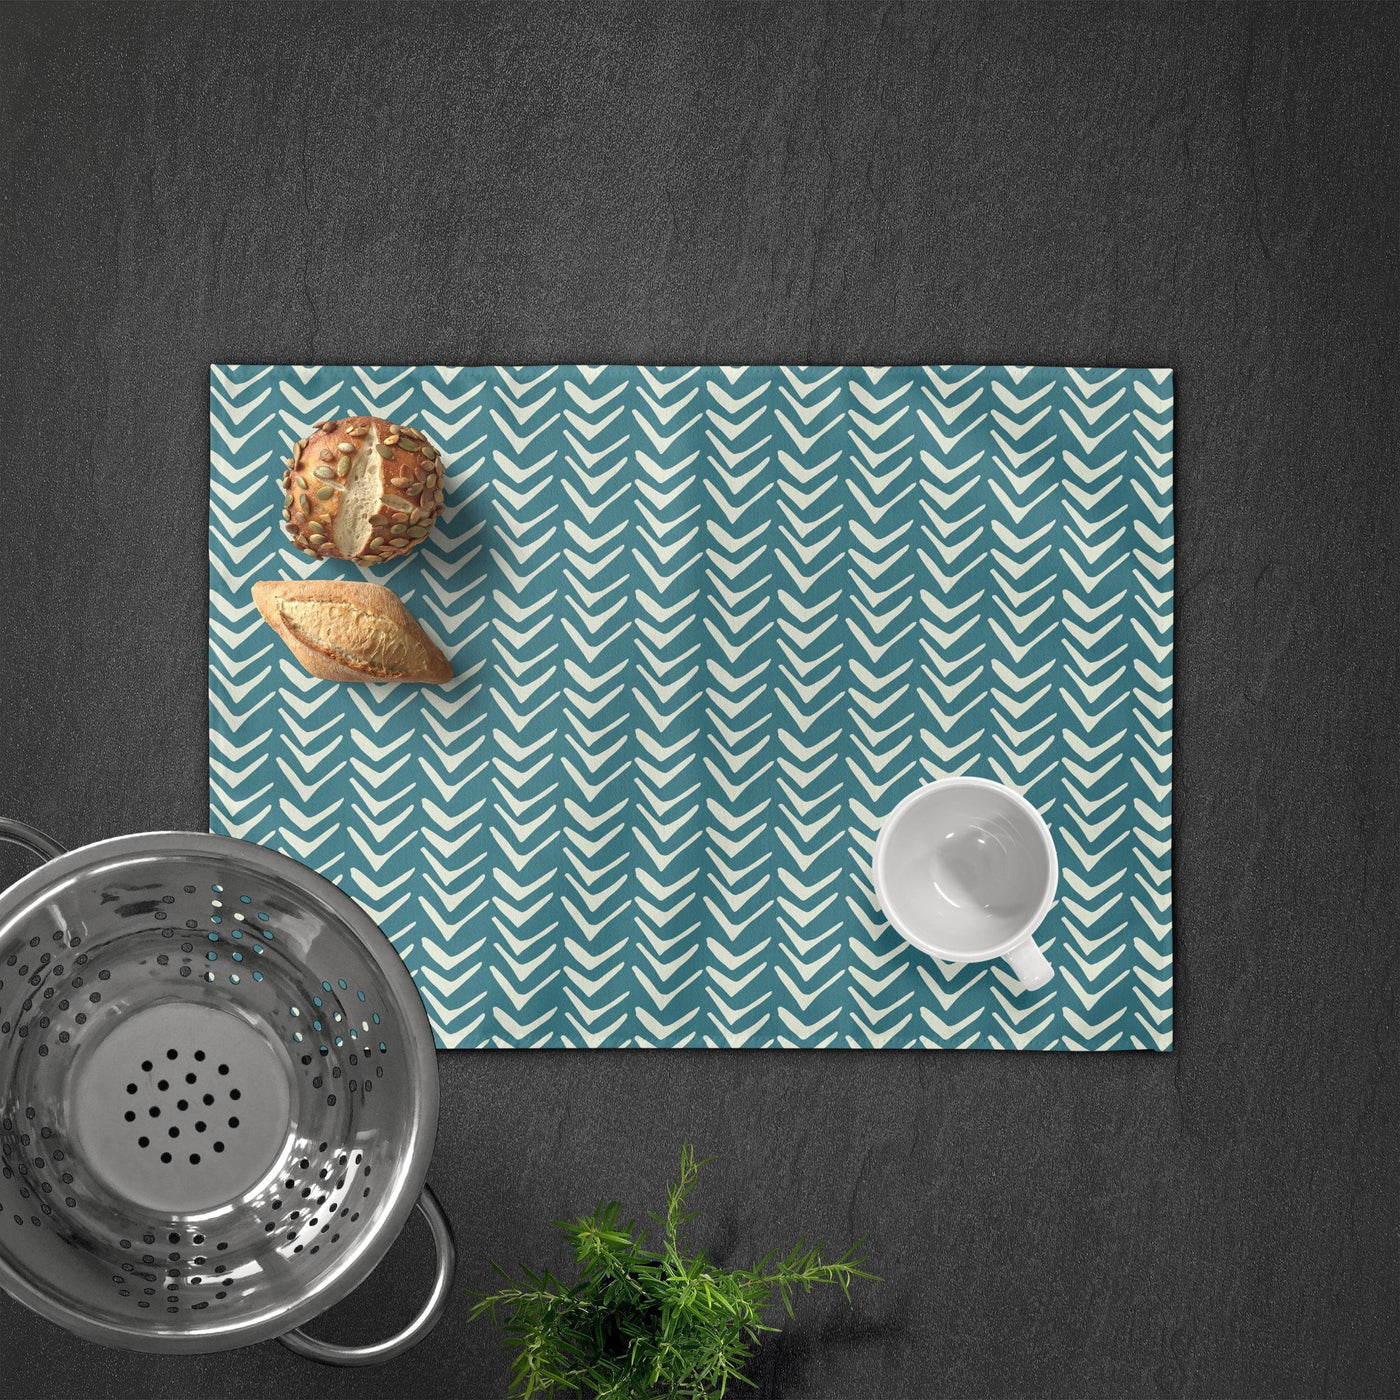 Teal Tribal Chevron Placemat | Sam + Zoey Home Basics Sam + Zoey